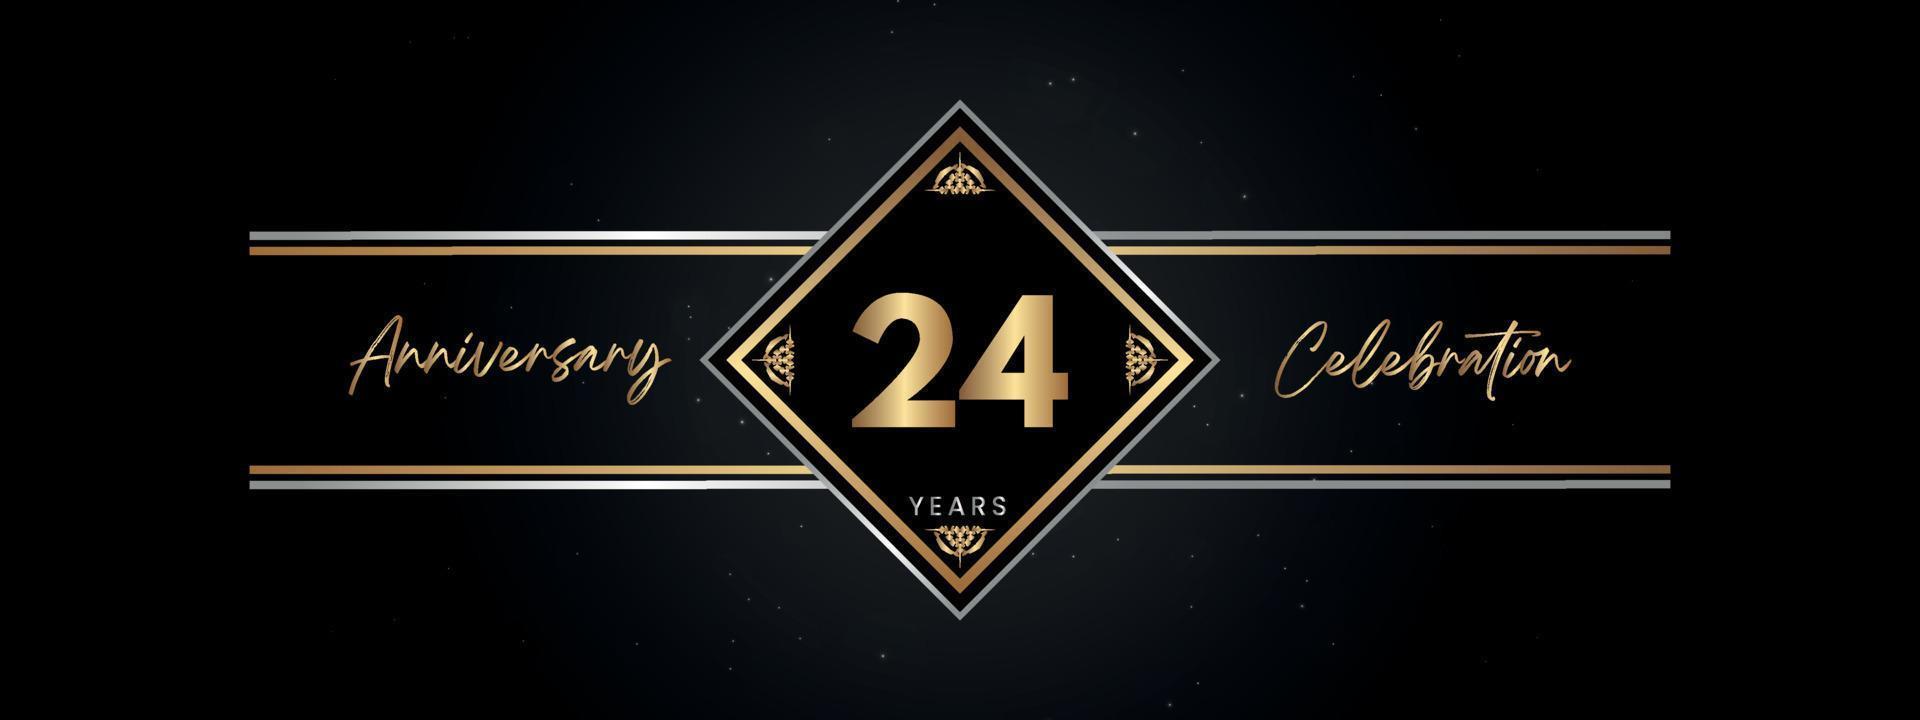 24 years anniversary golden color with decorative frame isolated on black background for anniversary celebration event, birthday party, brochure, greeting card. 24 Year Anniversary Template Design vector